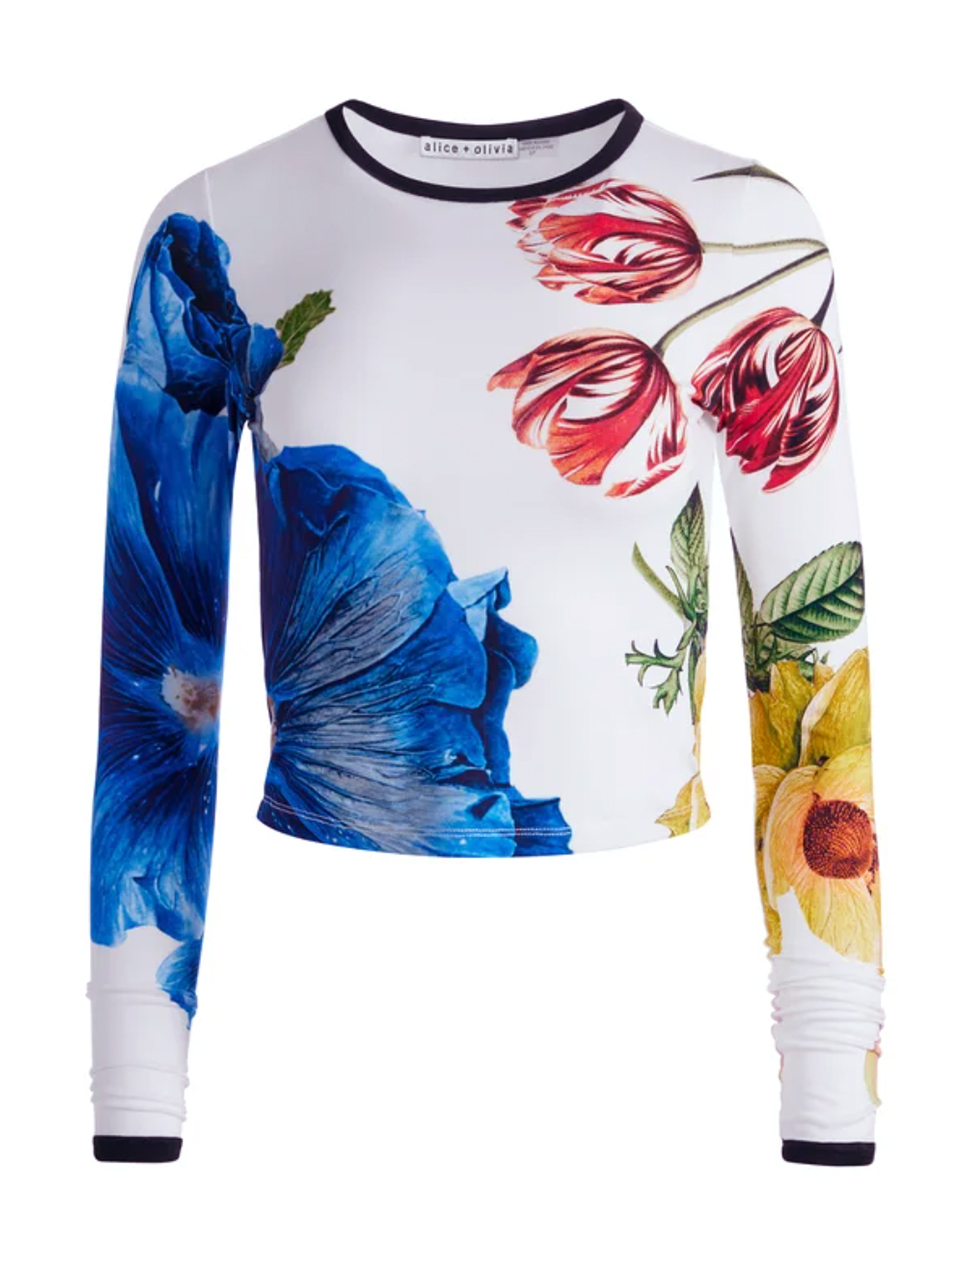 ALICE + OLIVIA Delaina Long Sleeve Top in Le Parisien Product Shot 